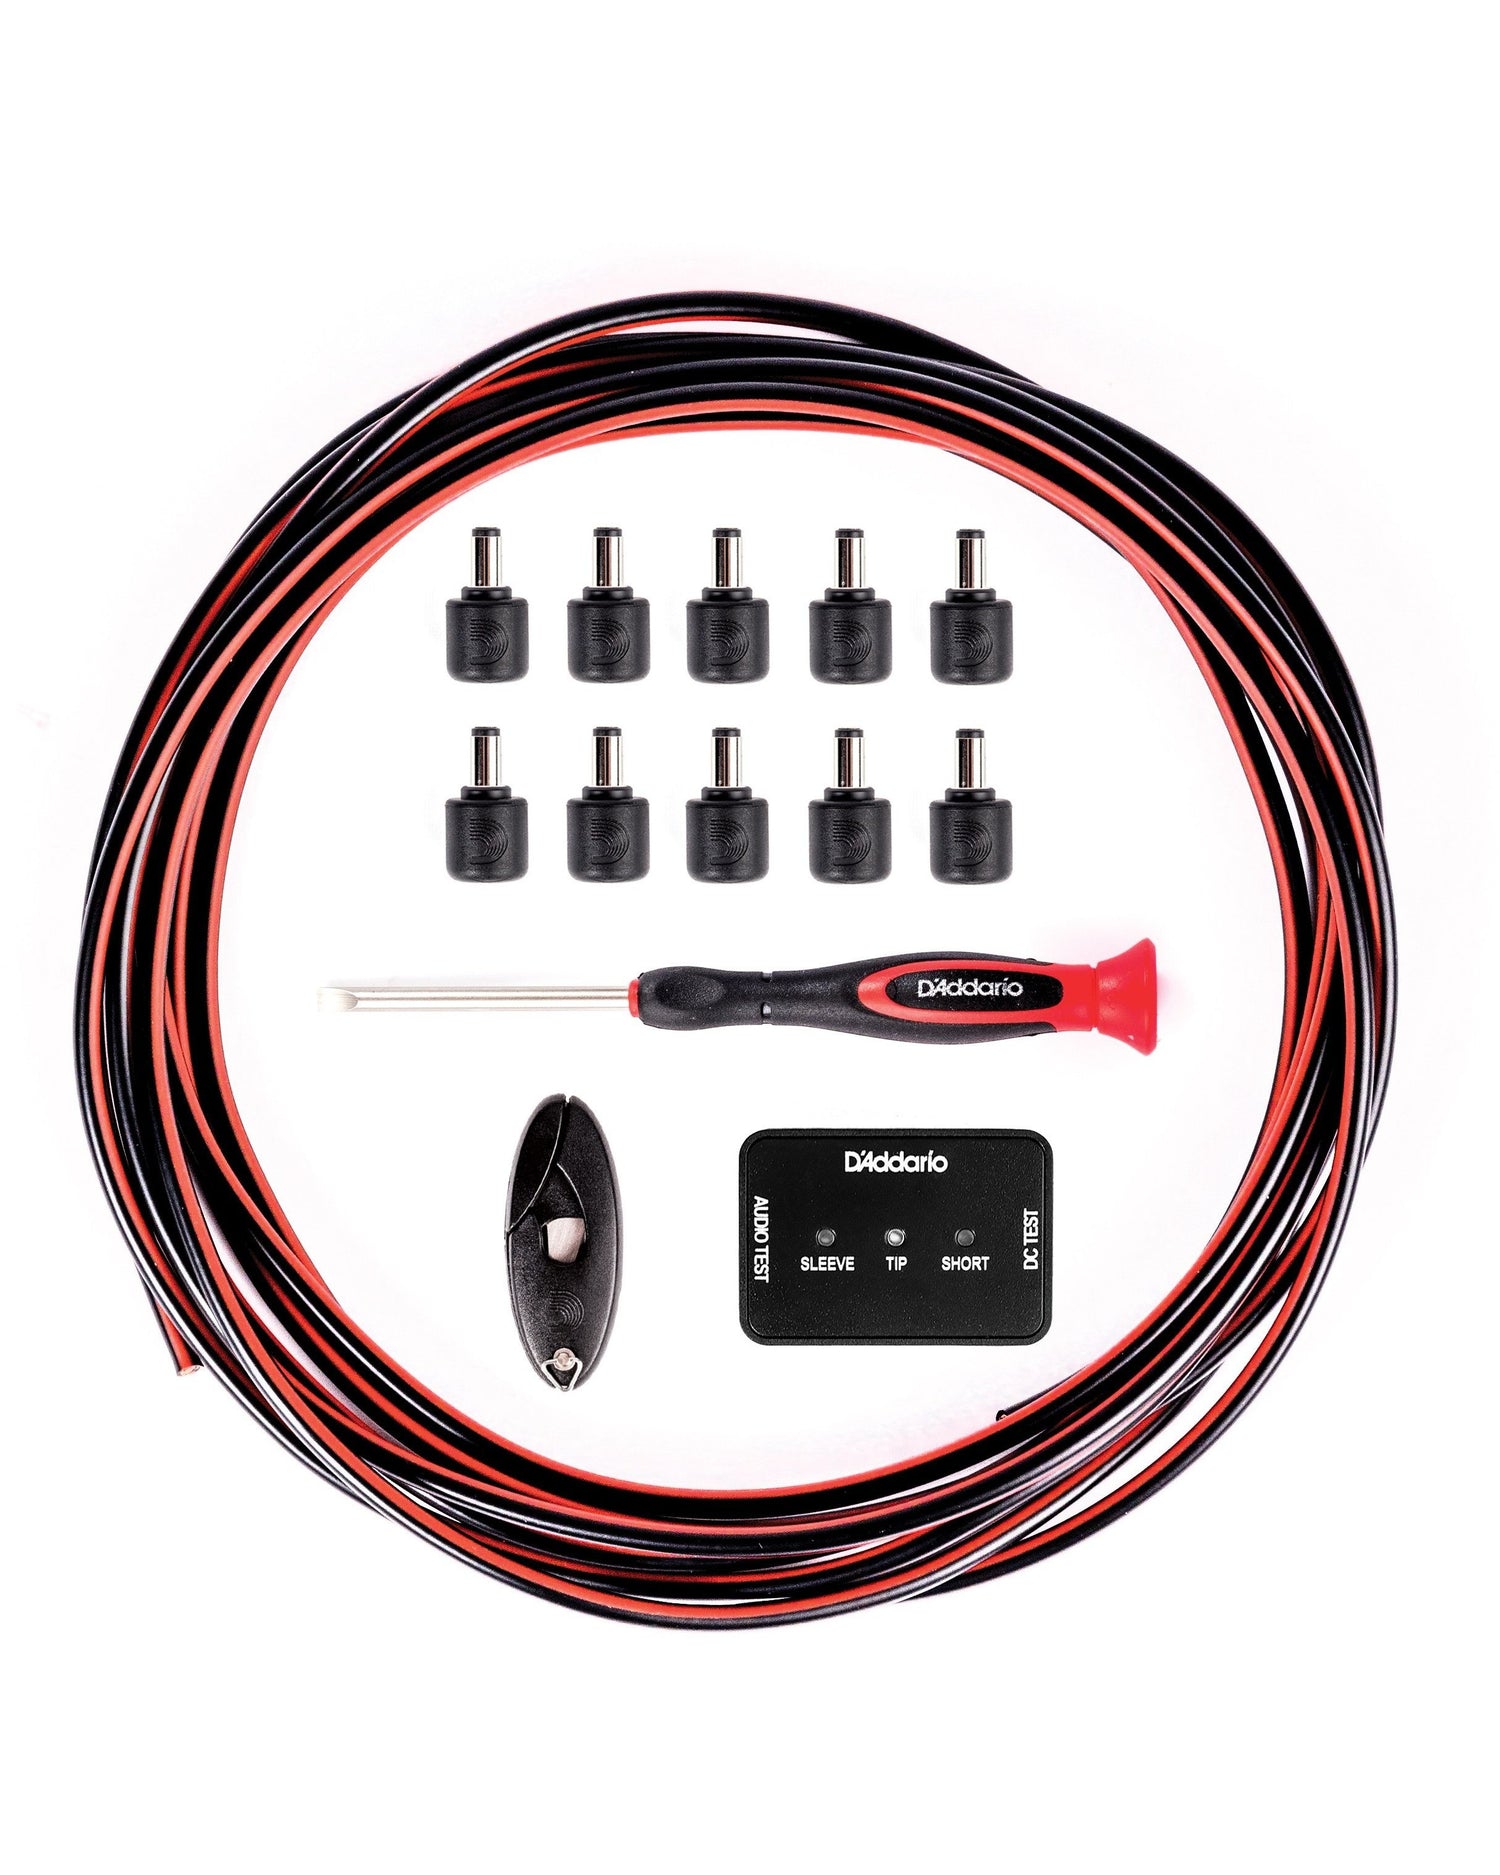 Image 1 of D'Addario Planet Waves DIY Solderless Pedalboard Power Cable Kit - SKU# PWRKIT : Product Type Effects & Signal Processors : Elderly Instruments